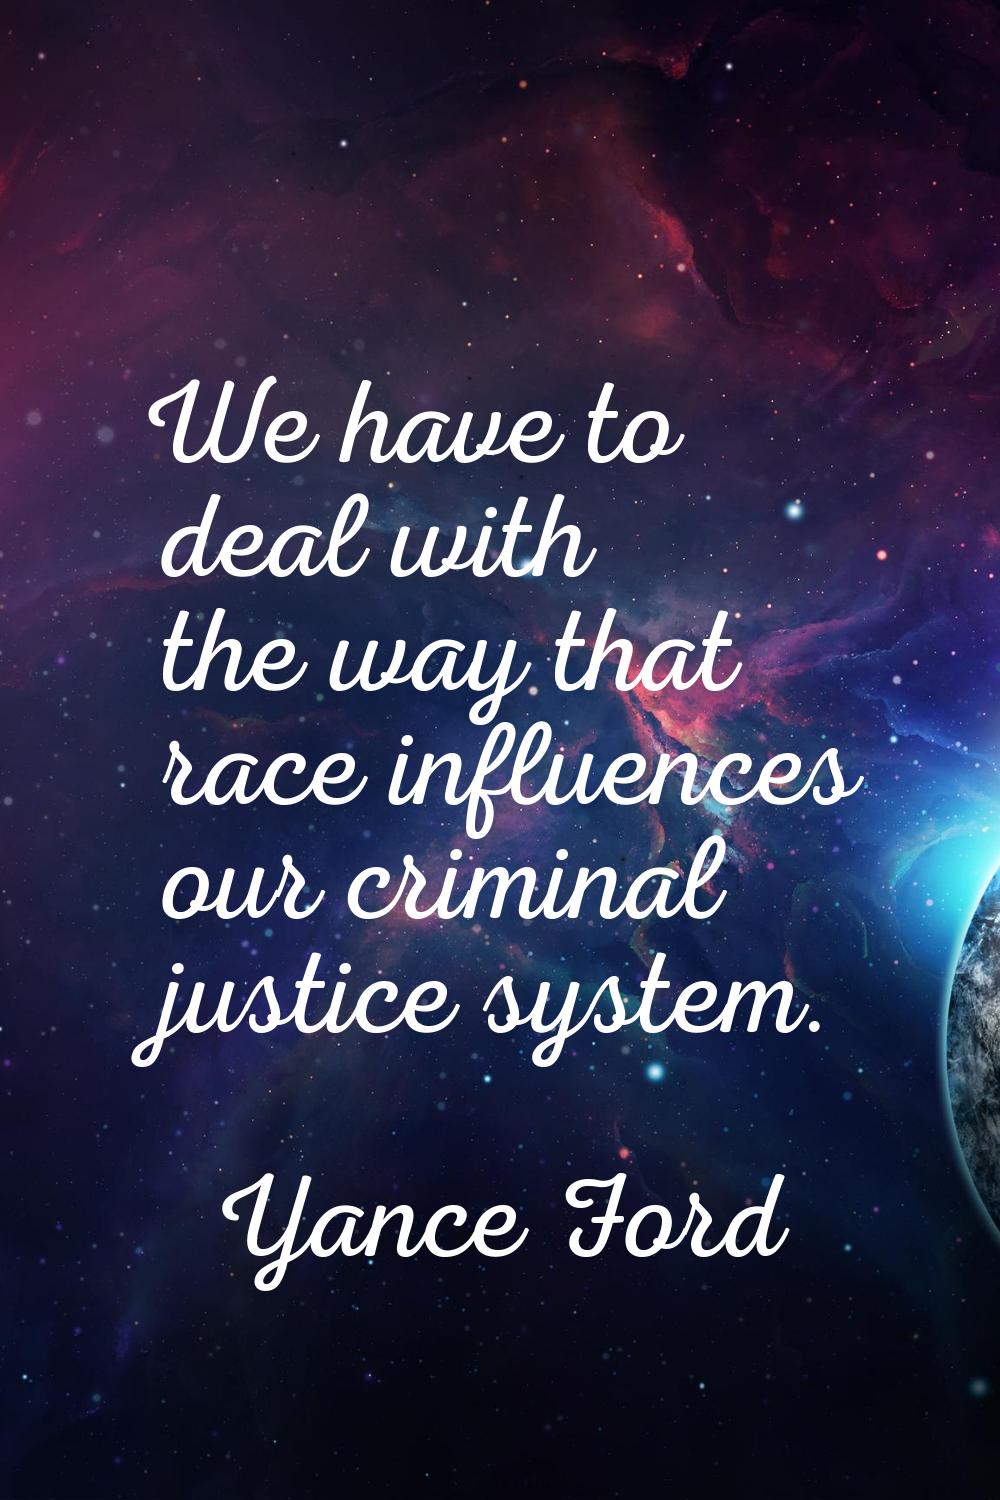 We have to deal with the way that race influences our criminal justice system.